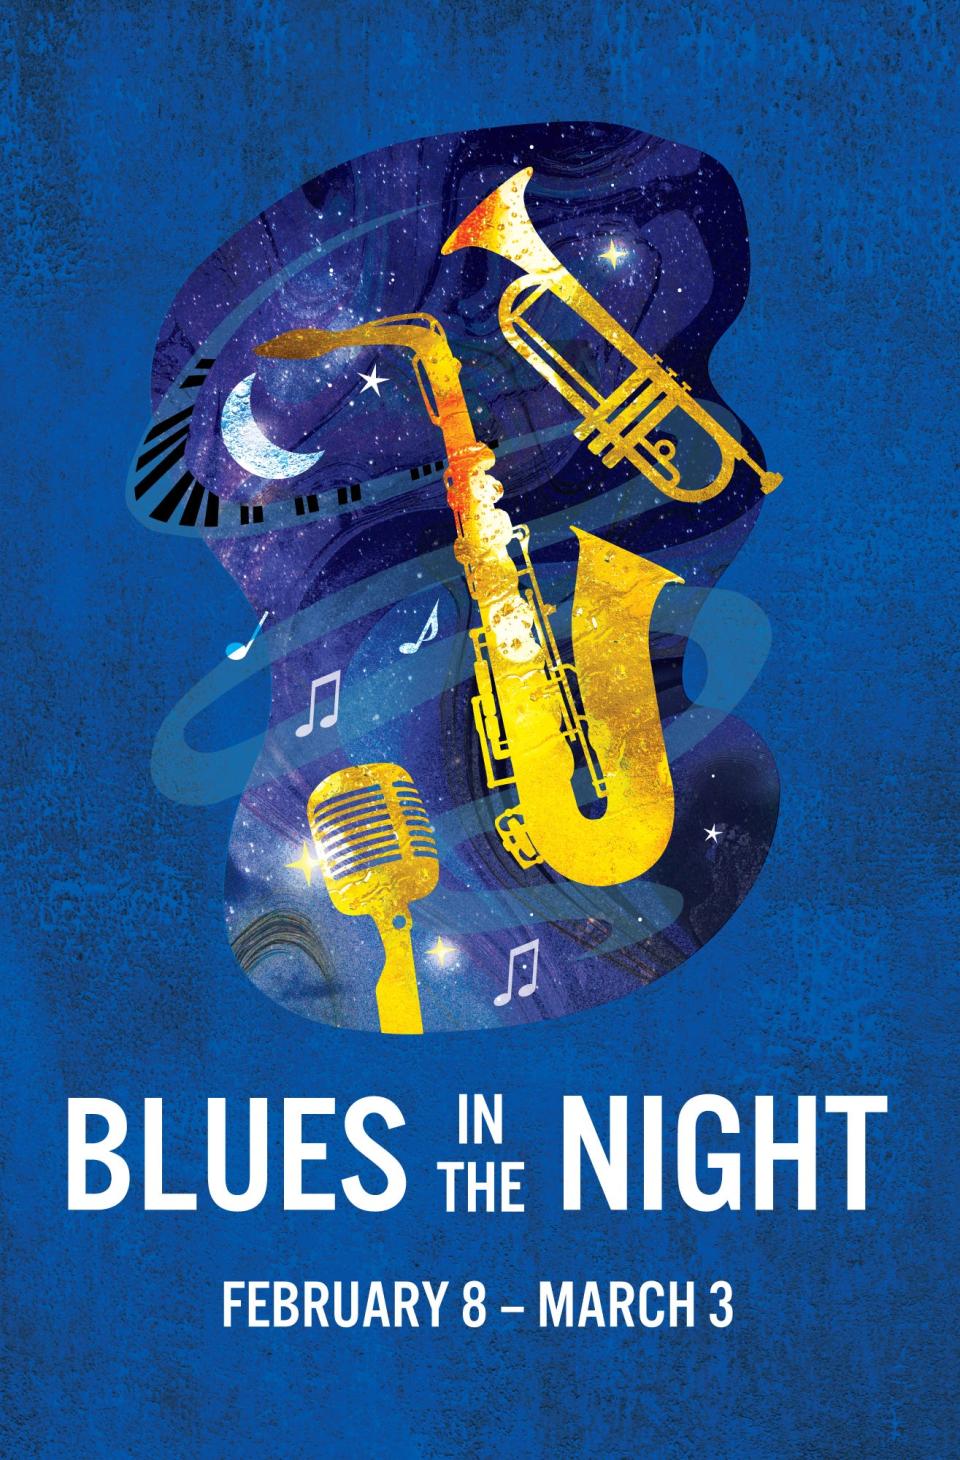 "Blues in the Night" opens Feb. 8 at Alabama Shakespeare Festival in Montgomery.